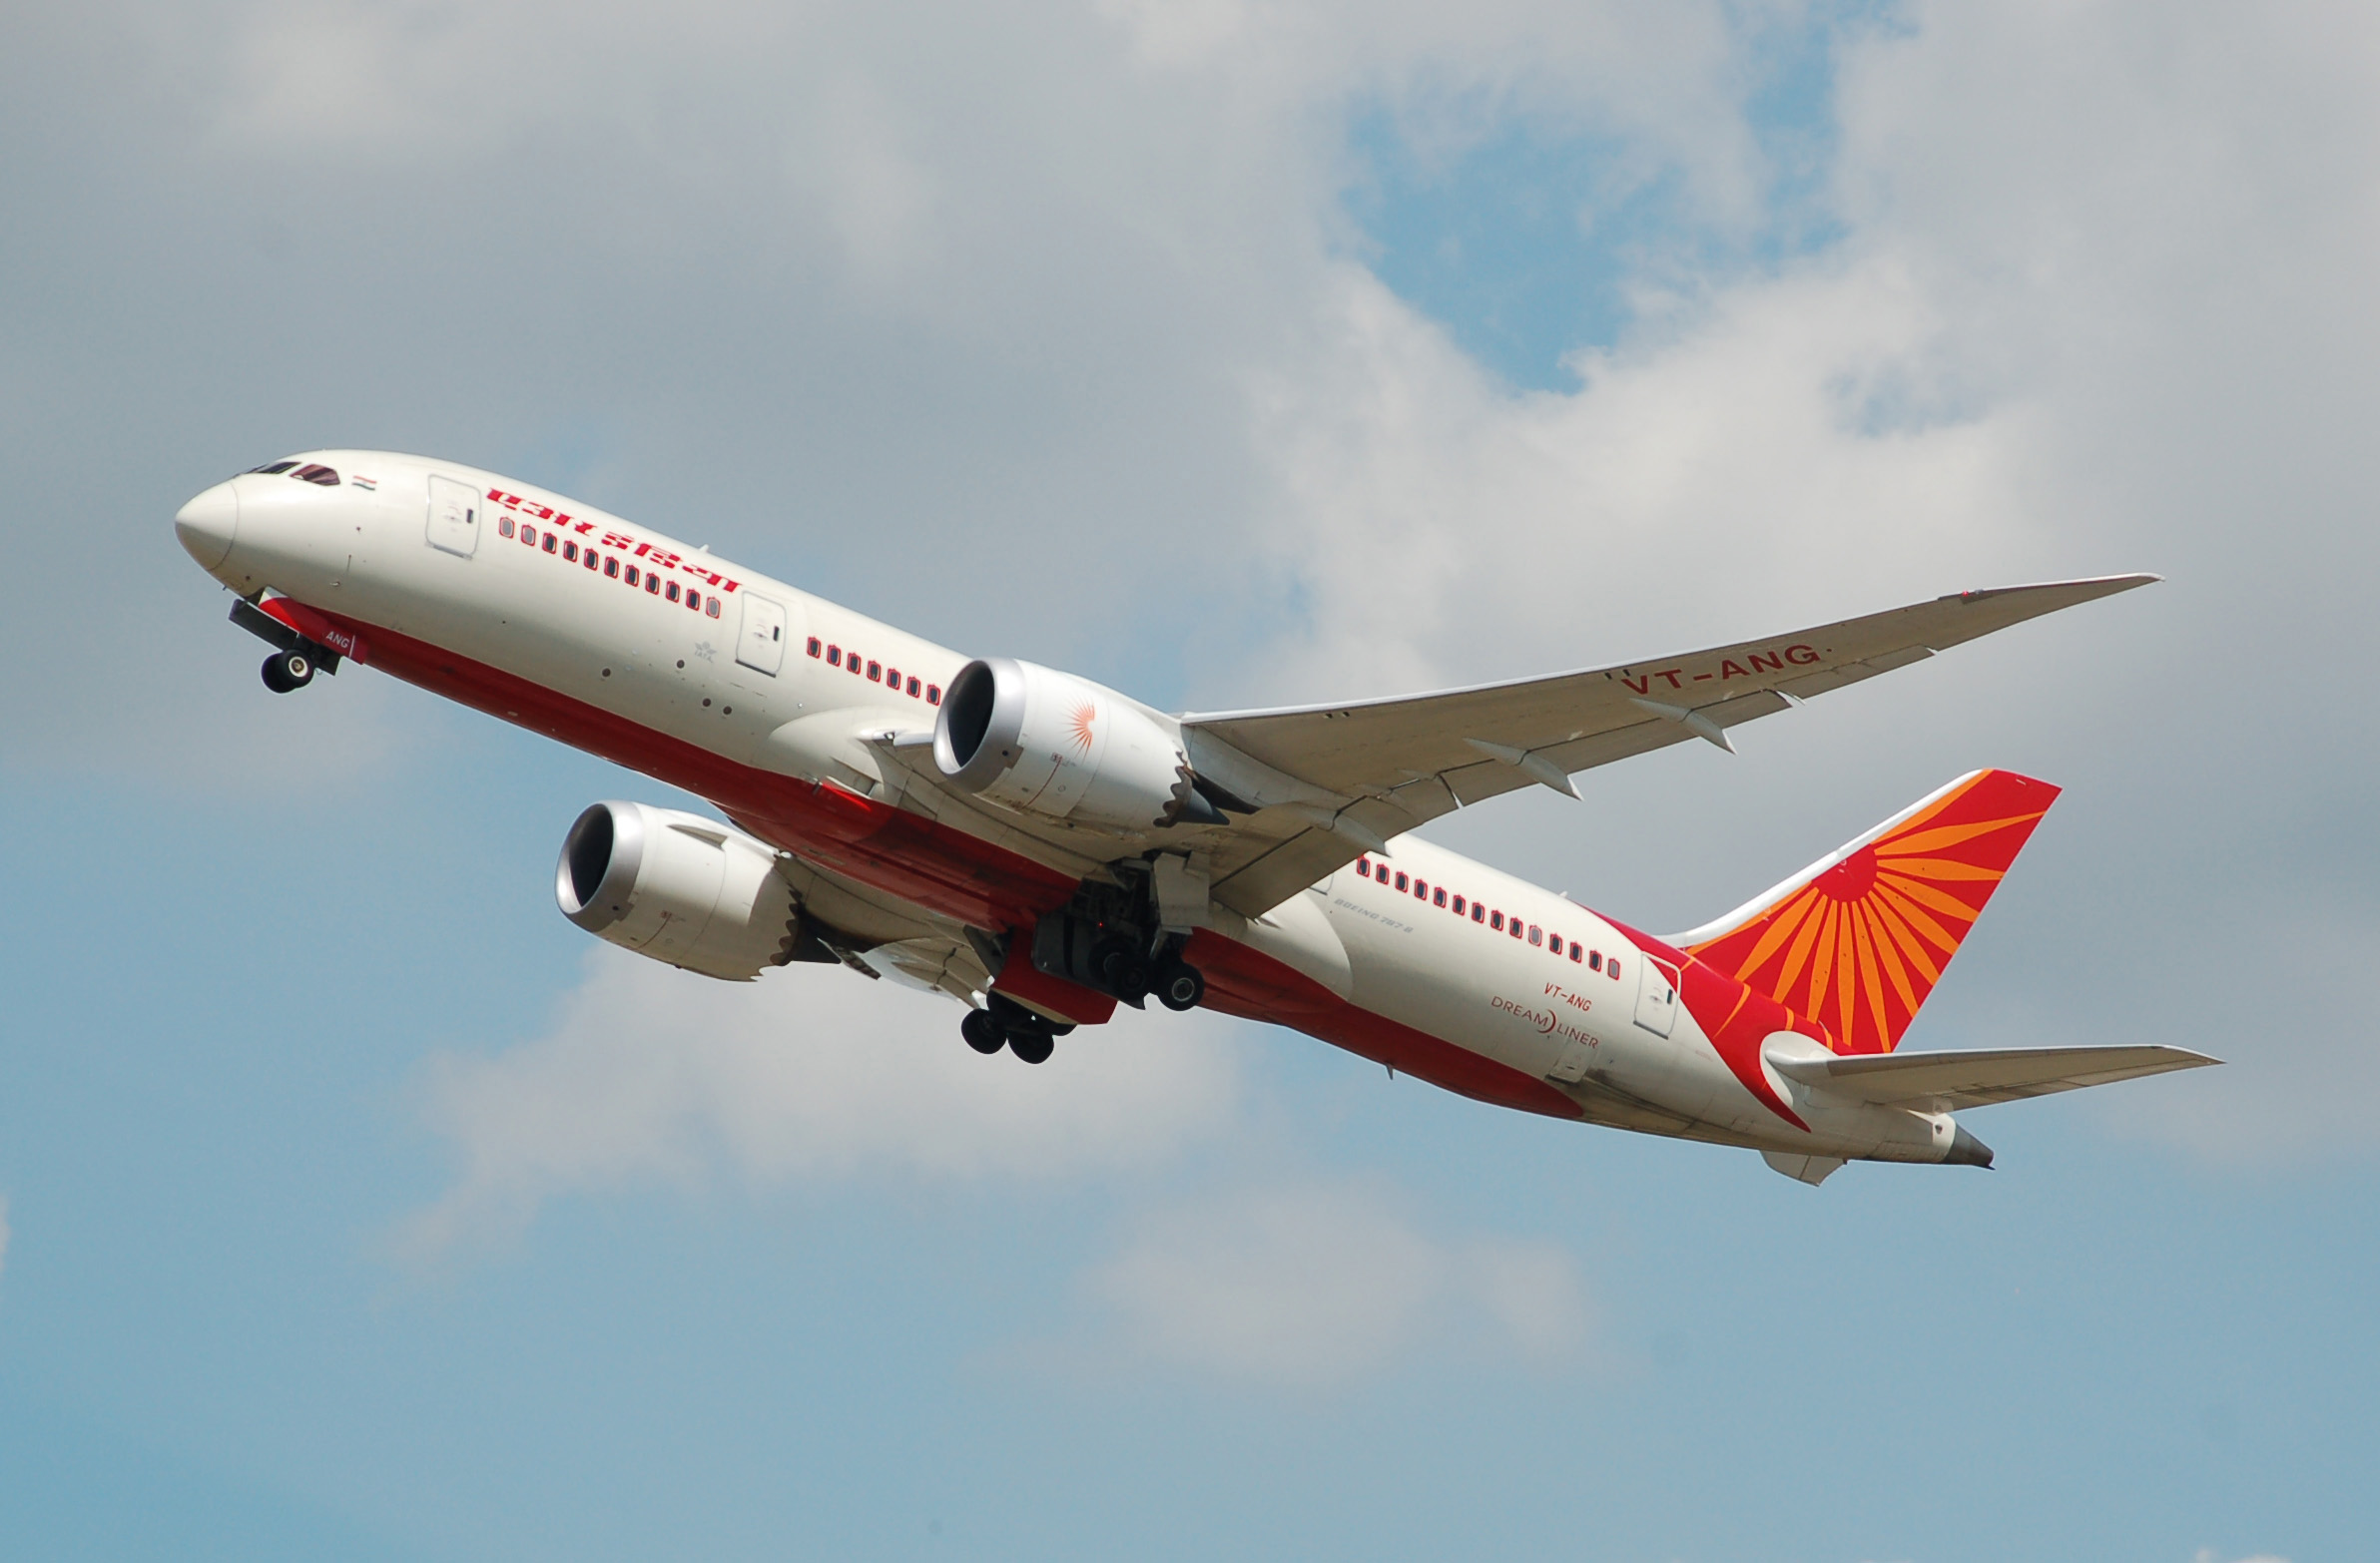 An Air India Boeing 787 Dreamliner climbs after takeoff.